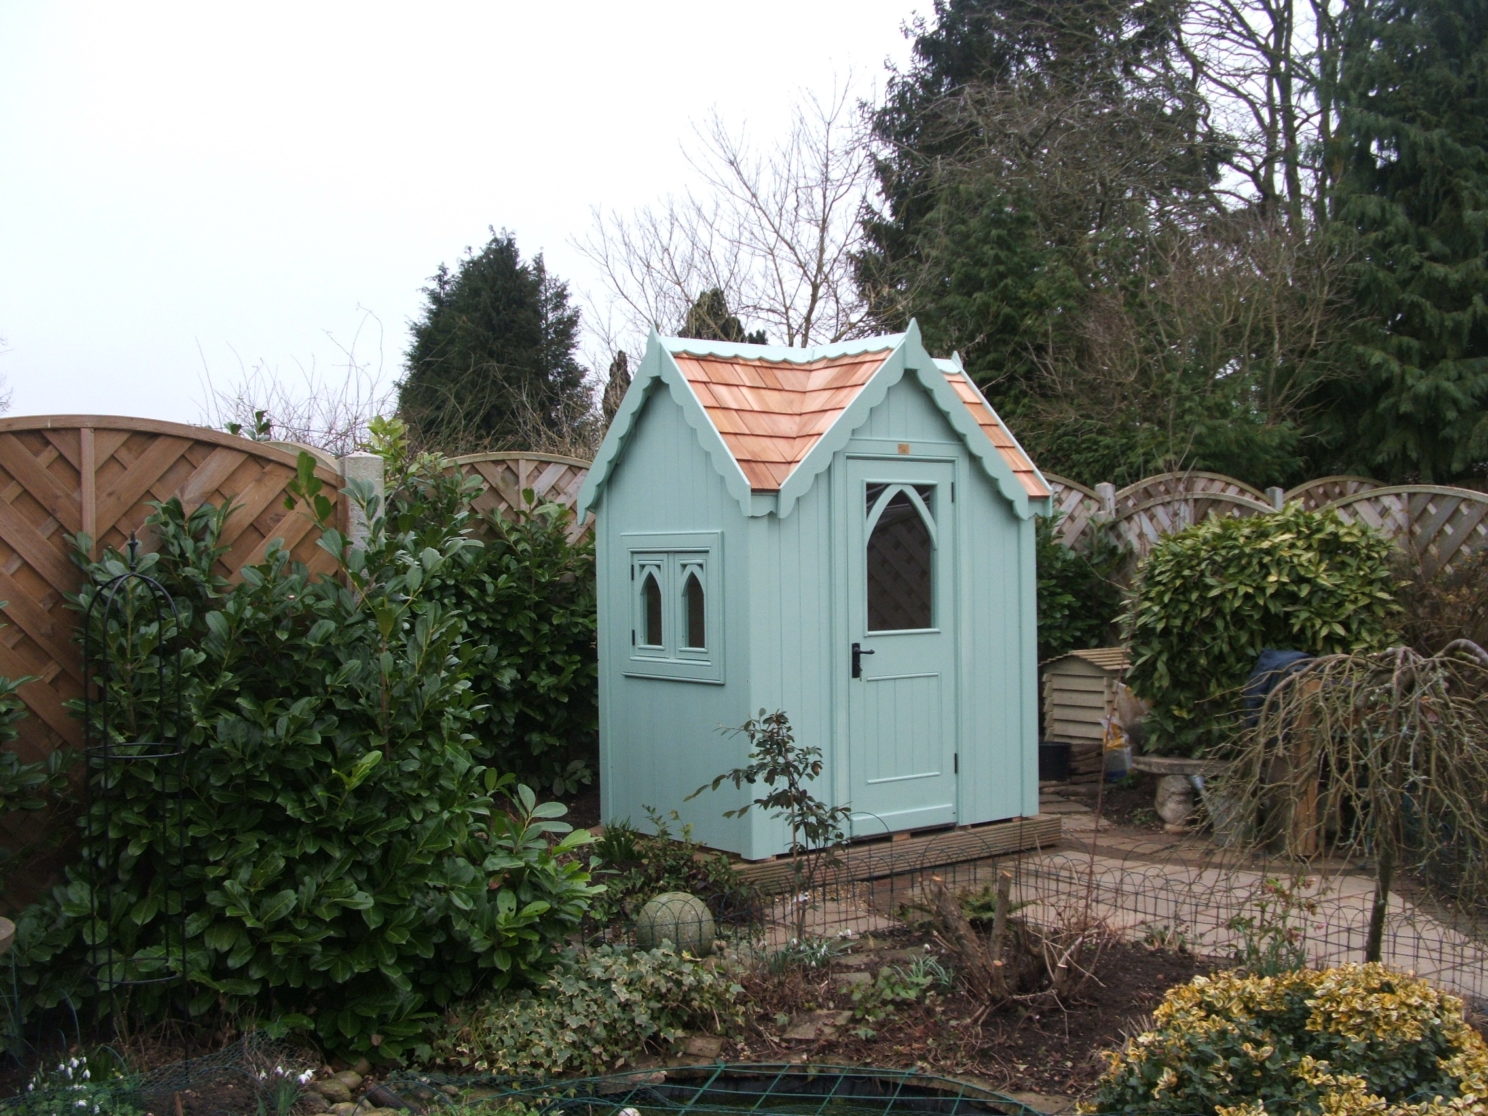 Gable roof posh garden shed